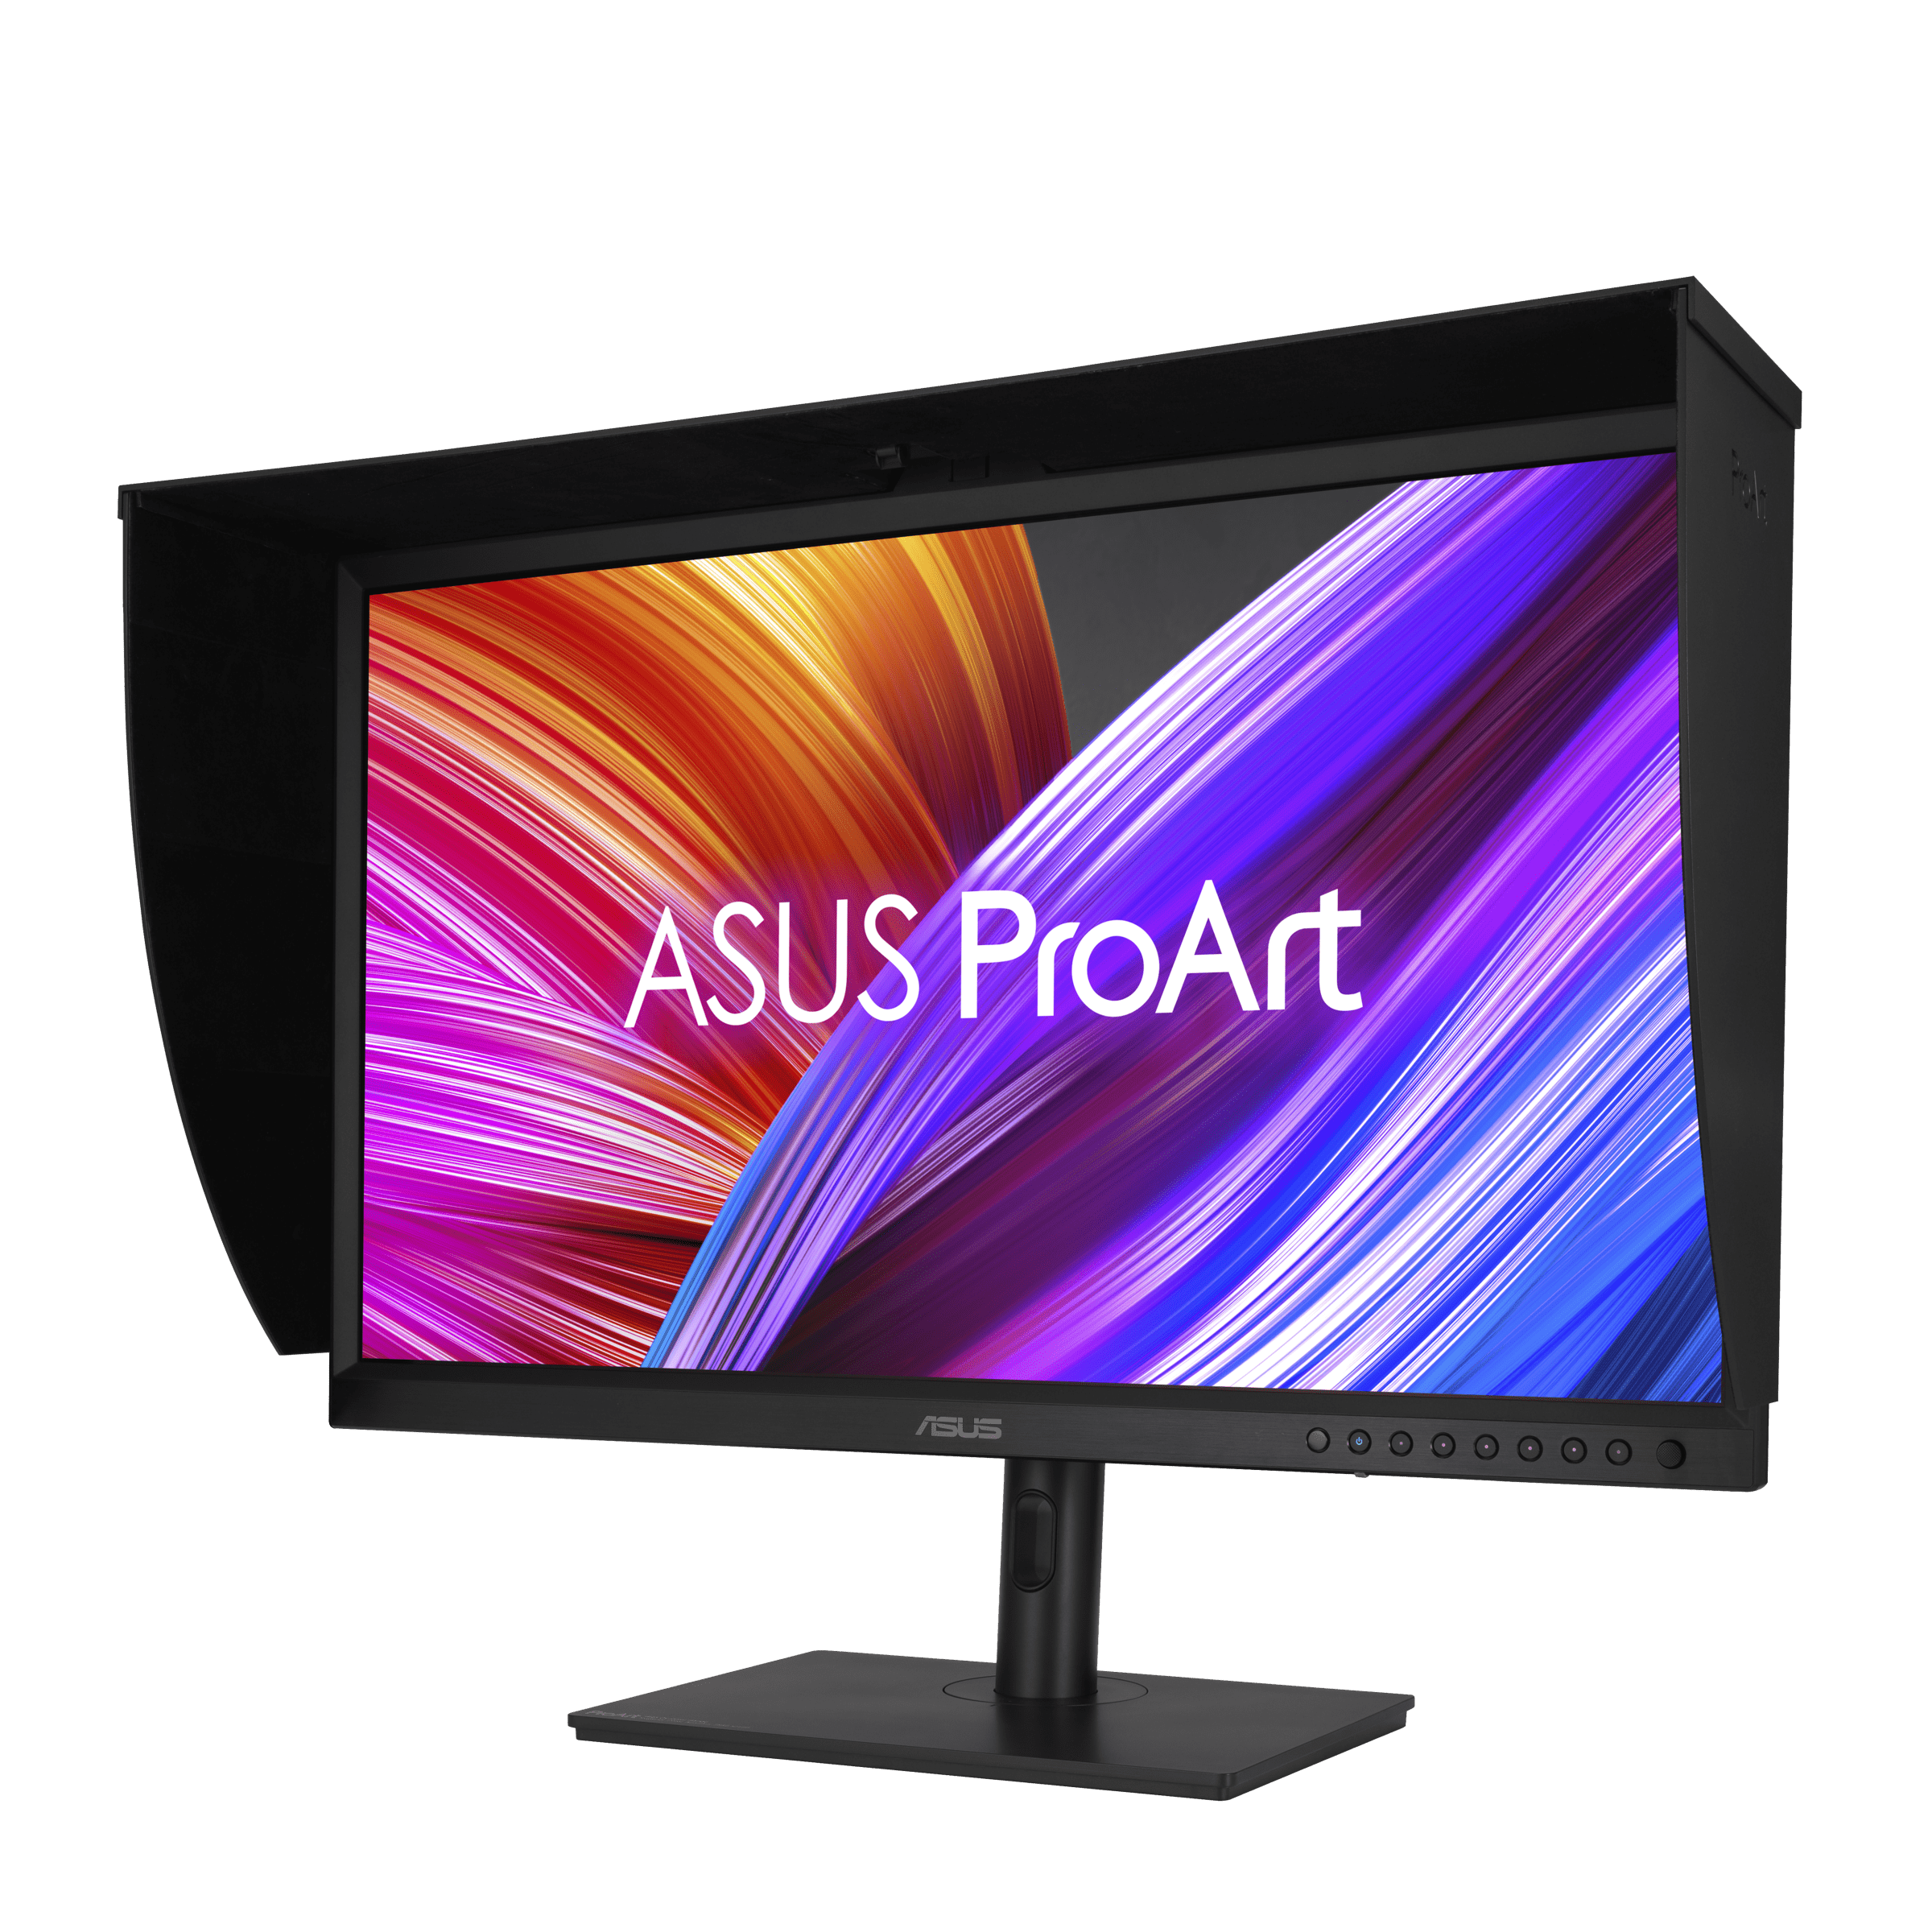 ASUS ProArt Series Monitor Product Video 